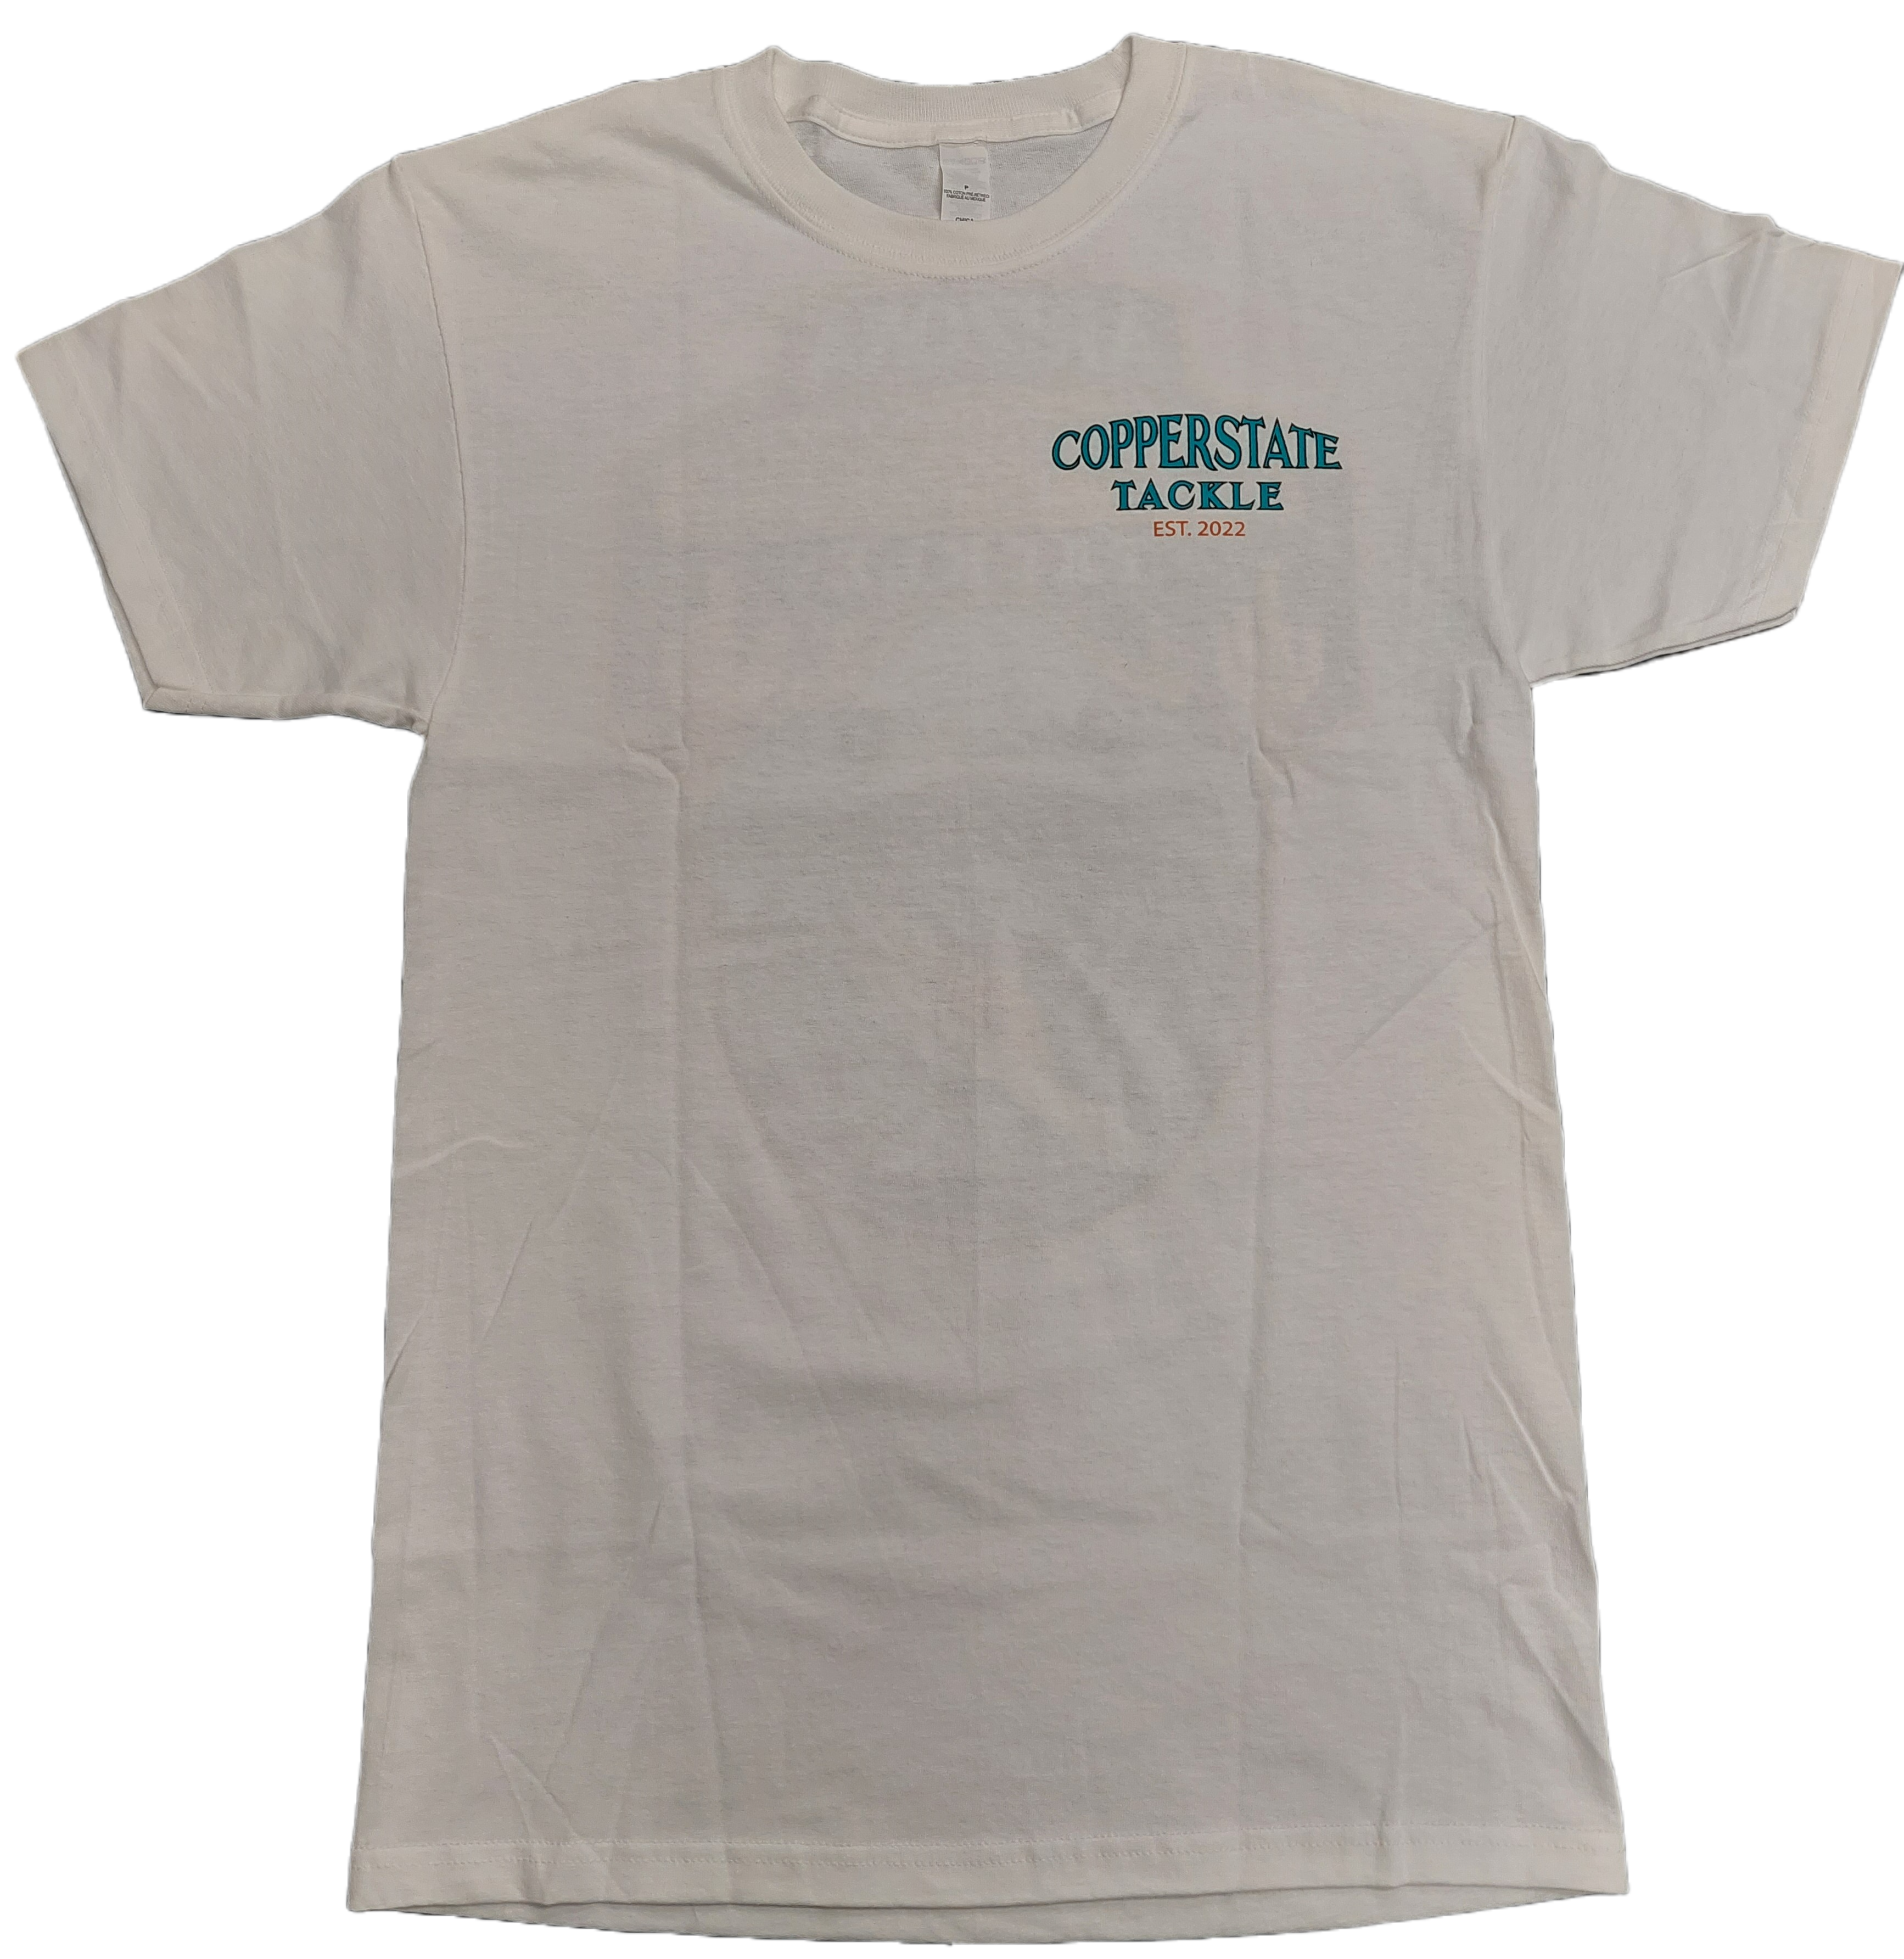 Buy white COPPERSTATE TACKLE ICAST ARIZONA EDITION SHIRT